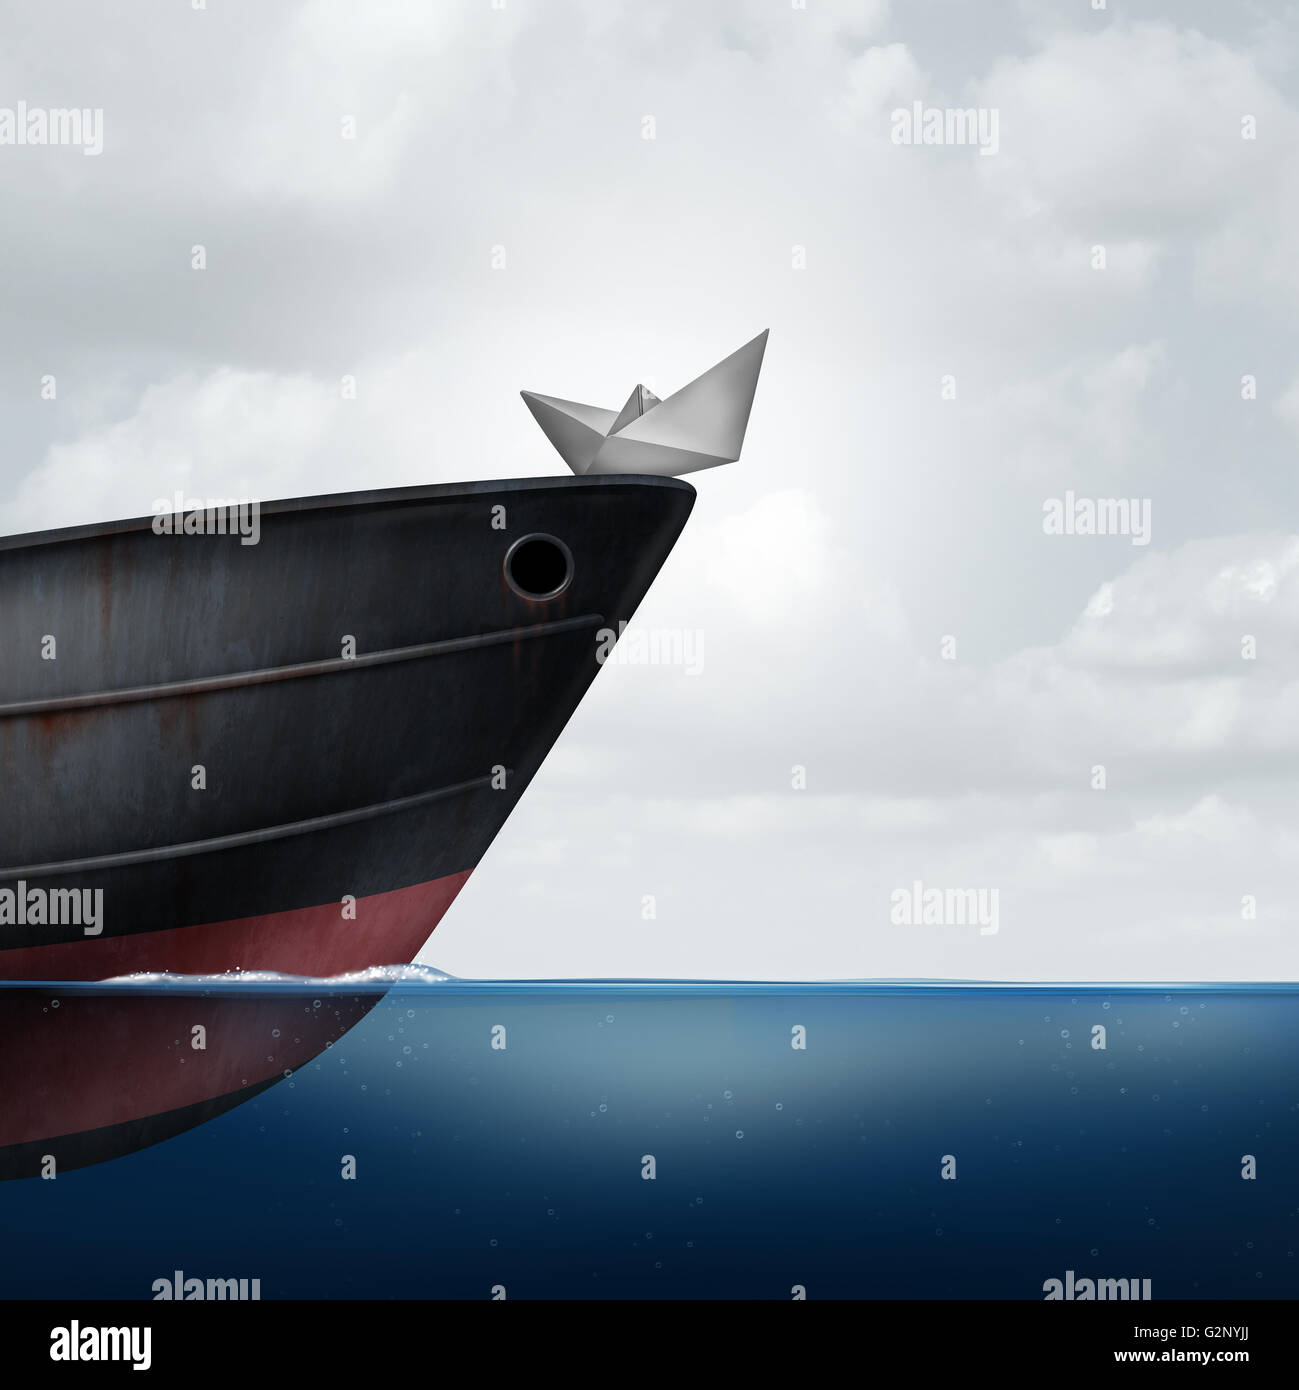 Big business helping small business as a financial  and corporate support metaphor as a huge ship providing assistance to a small paper boat as a symbol for investment or economic funding of smaller companies with 3D illustration elements. Stock Photo